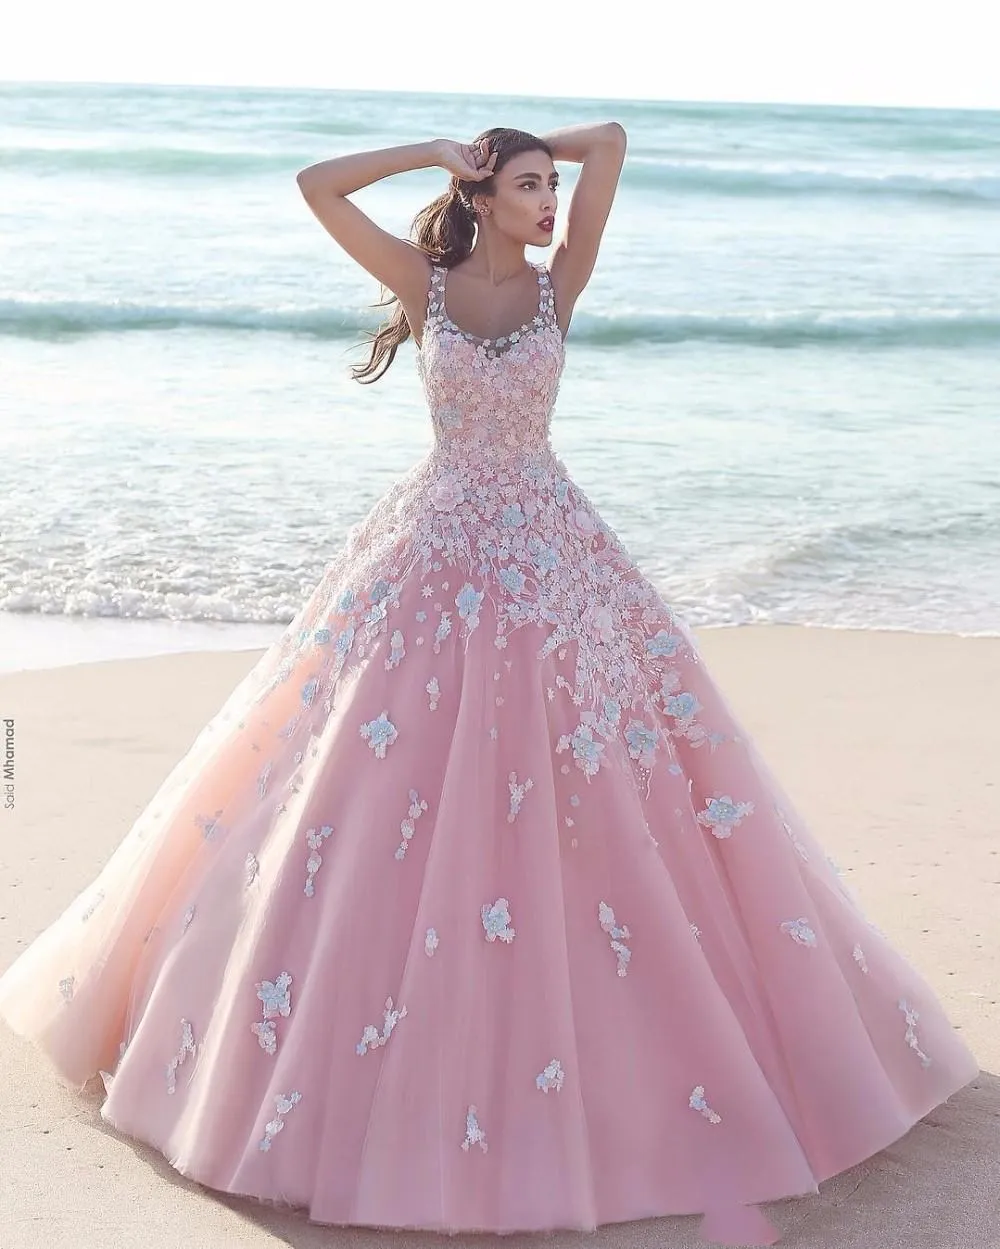 Princess Floral Flower Pink Ball Gown Quinceanera Dresses Applique Tulle Scoop Sleeveless Lace Bodice Long Prom Dresses Formal Party